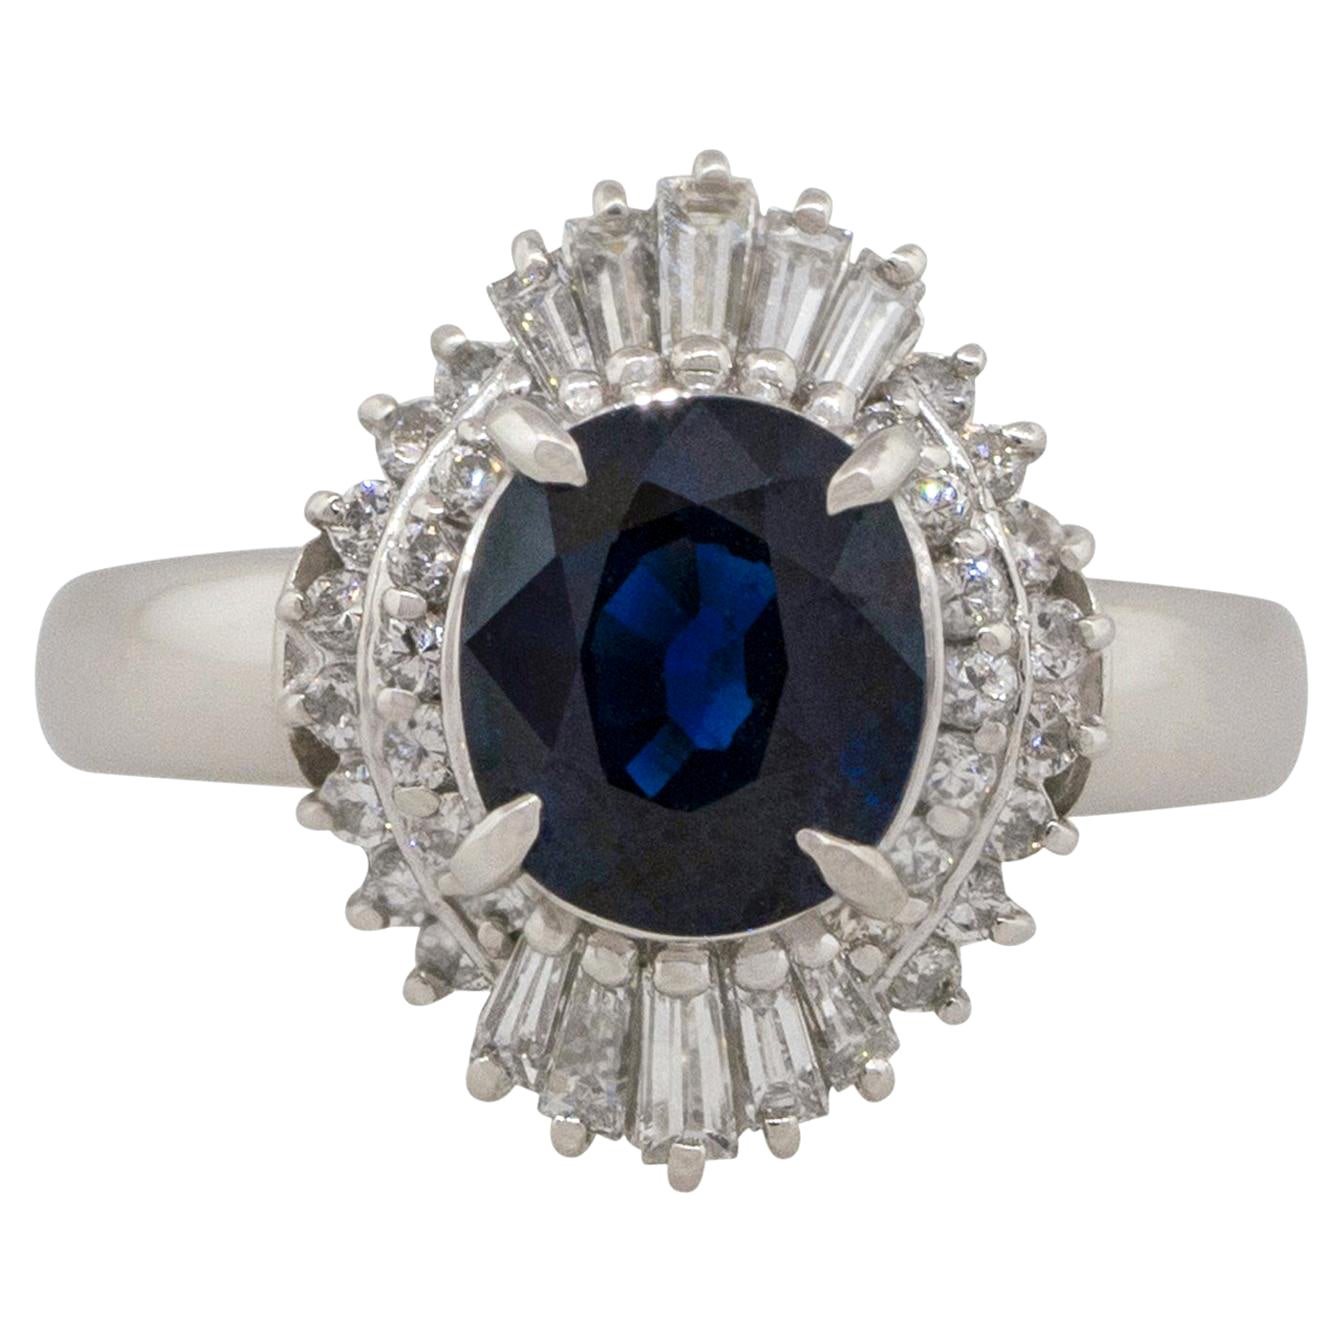 1.98 Carat Oval Sapphire Center Diamond Cocktail Ring Platinum in Stock For Sale